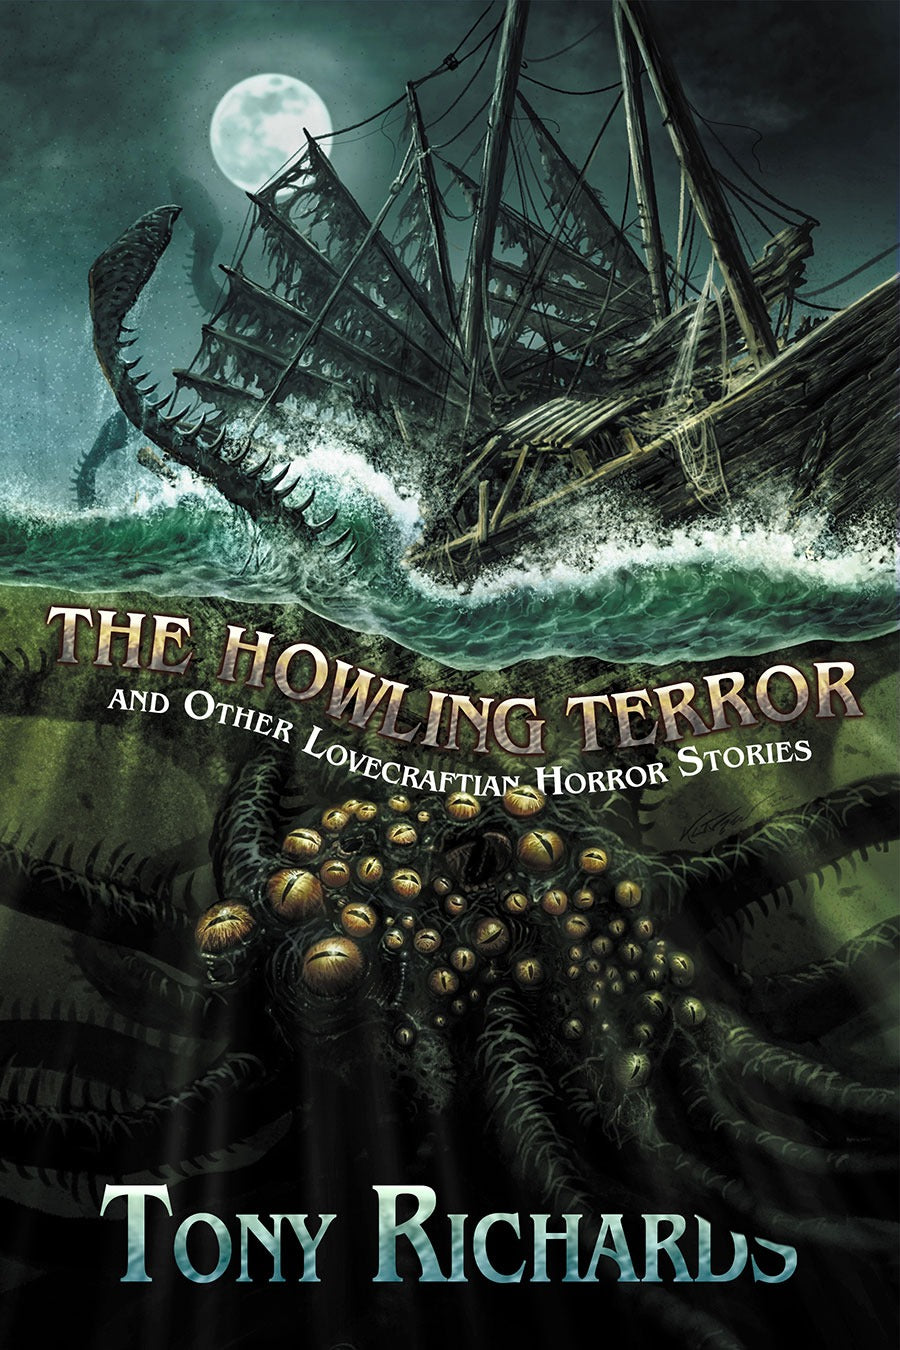 The Howling Terror and Other Lovecraftian Horror Stories Trade Paperback